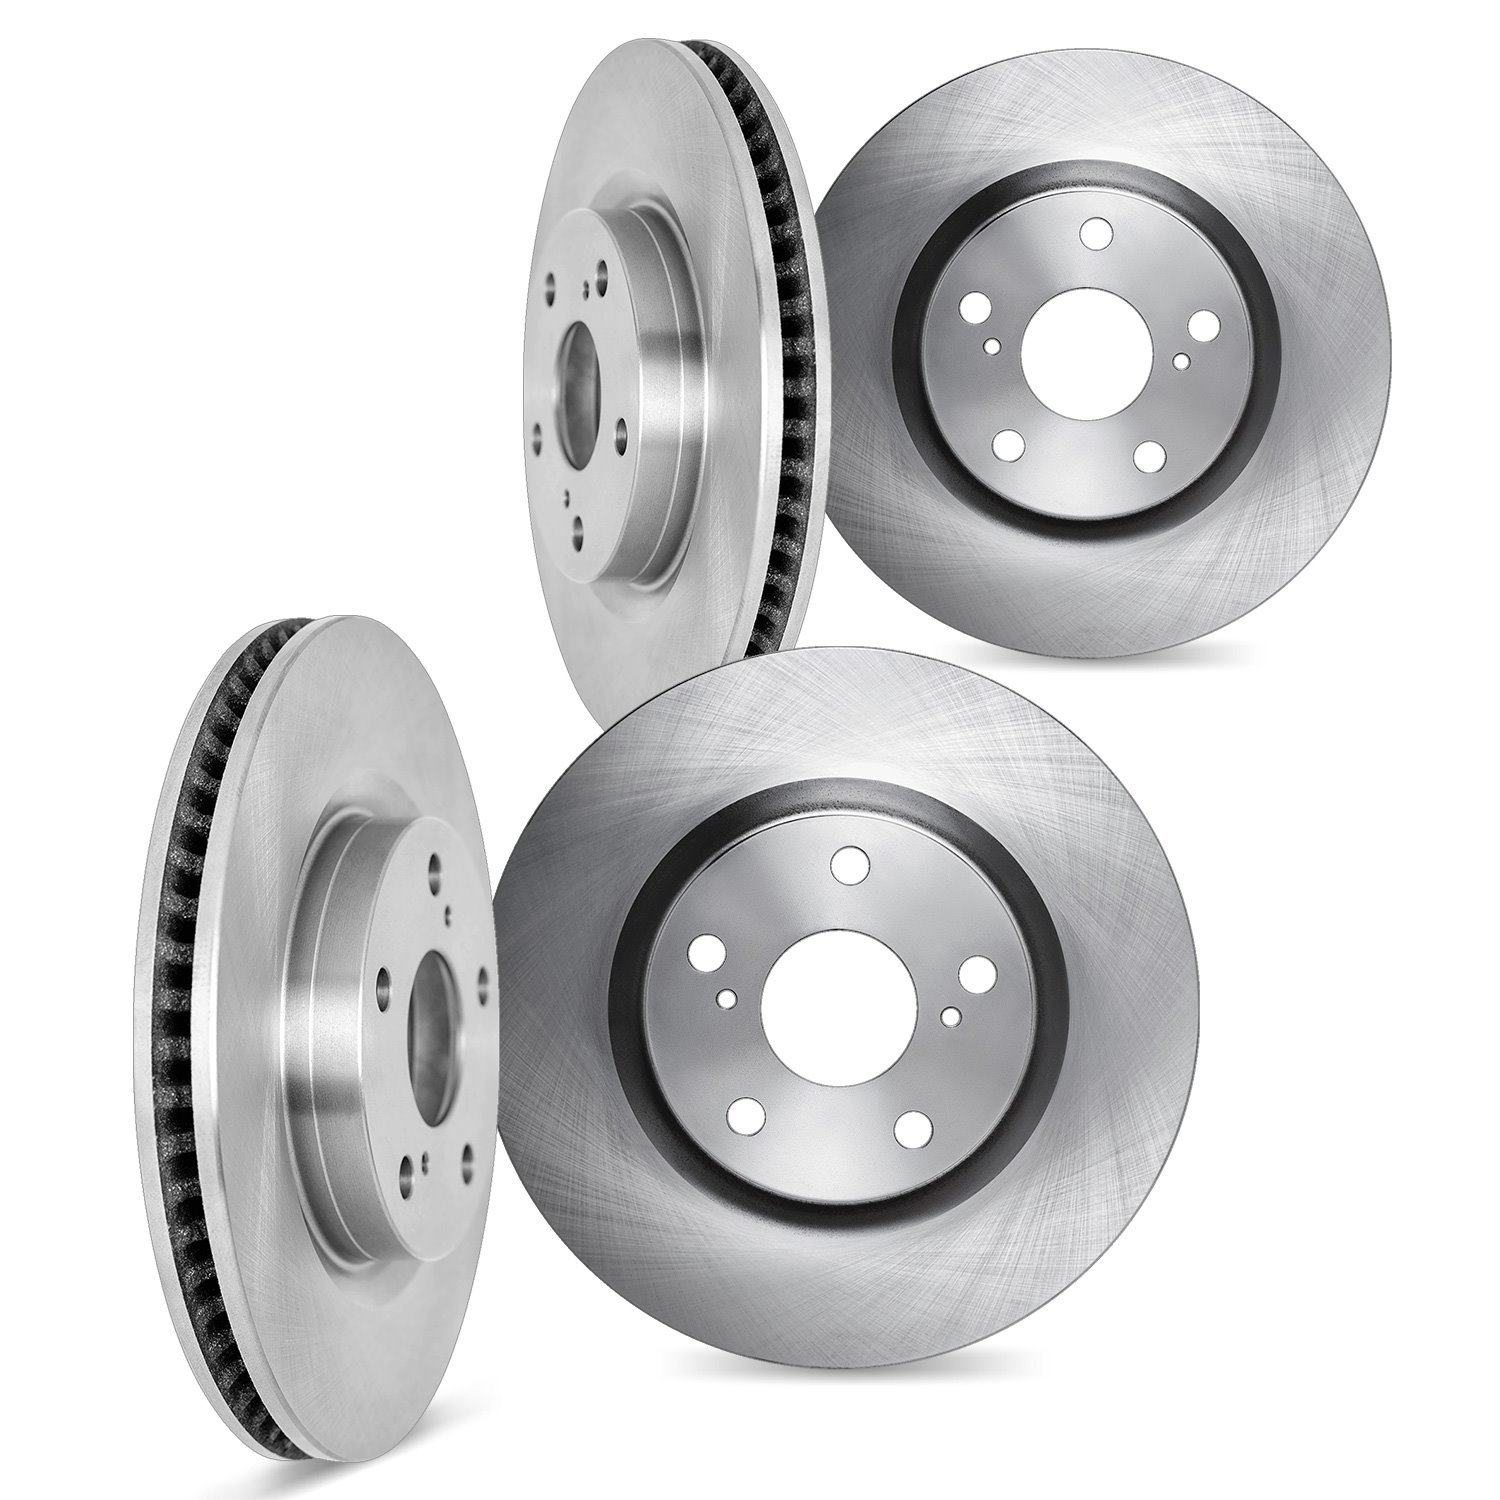 6004-76170 Brake Rotors, Fits Select Lexus/Toyota/Scion, Position: Front and Rear